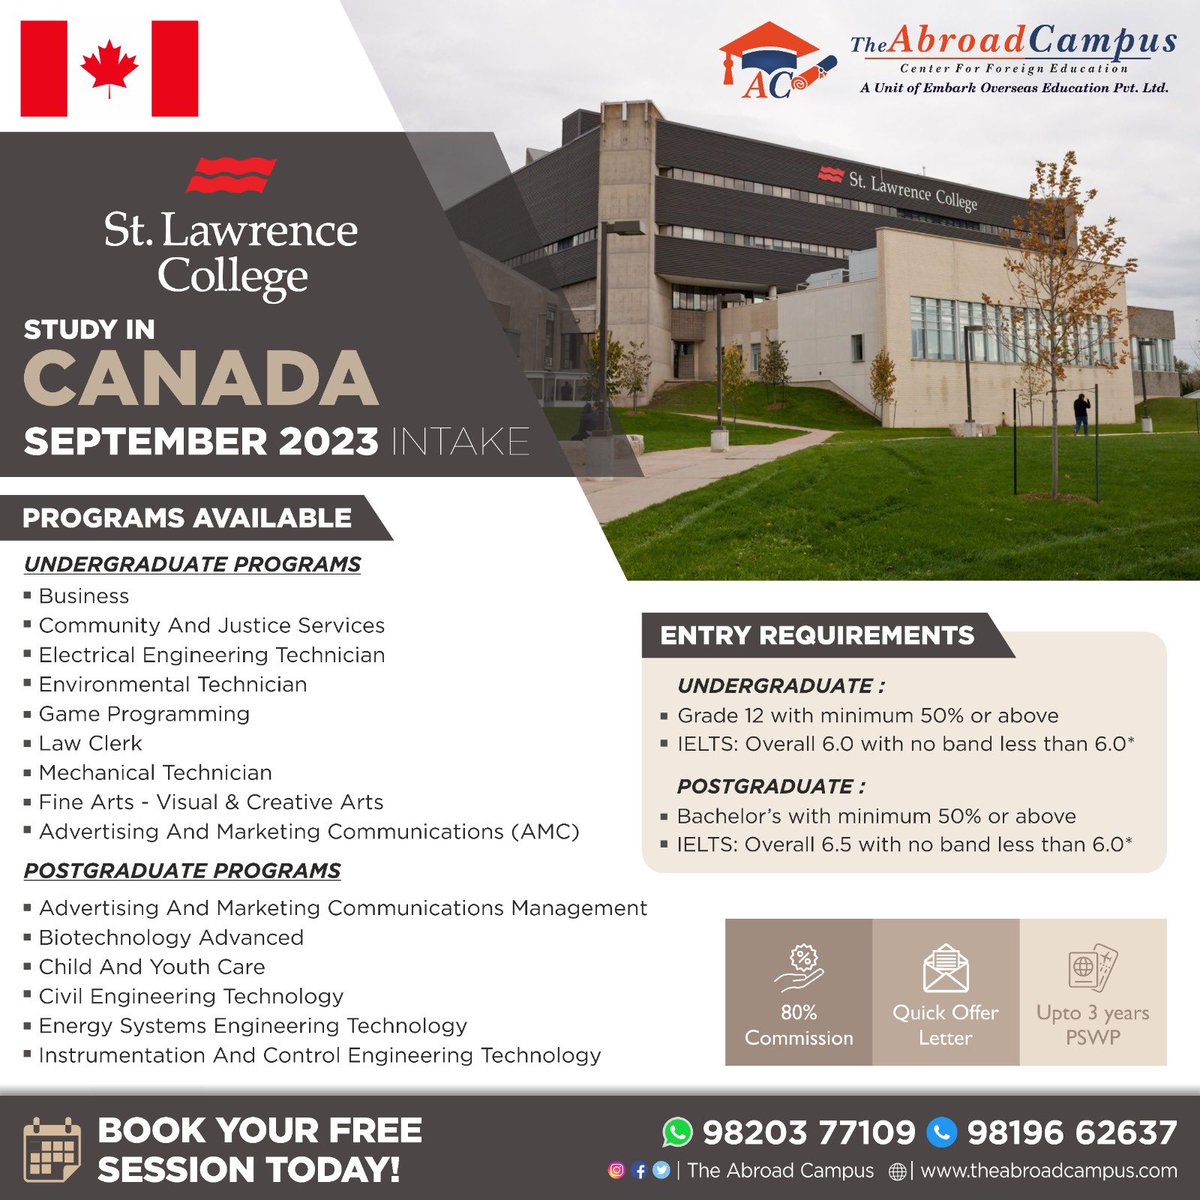 Canada Connect: Uniting Life and Learning for Onshore Students! 🏫🌍

🎓📝 Applications now open for the September 2023 intake at St. Lawrence College

#theabroadcampus #stlawrencecollege #canada #studyincanada #septintake #canadavisa #mumbai #studyabroadconsultant #applynow